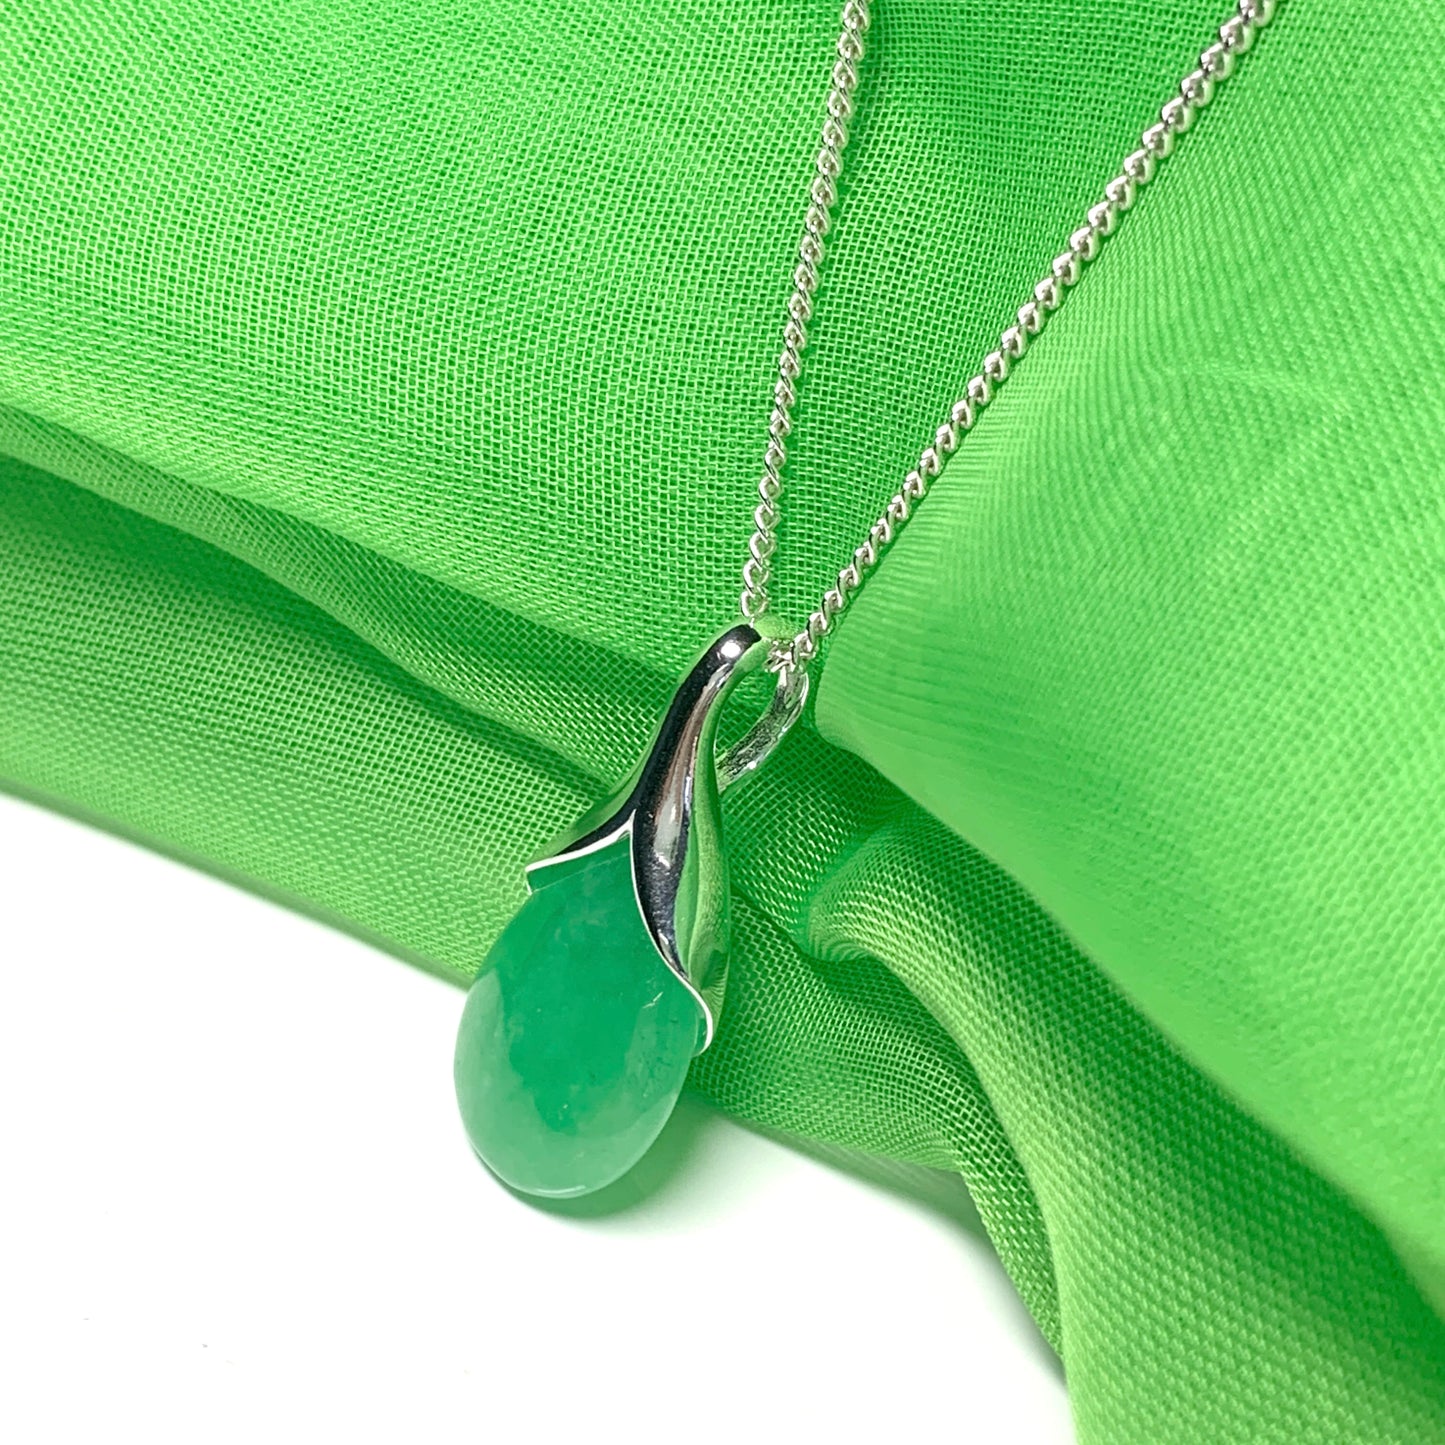 Real green jade necklace tear drop shaped pendant sterling silver